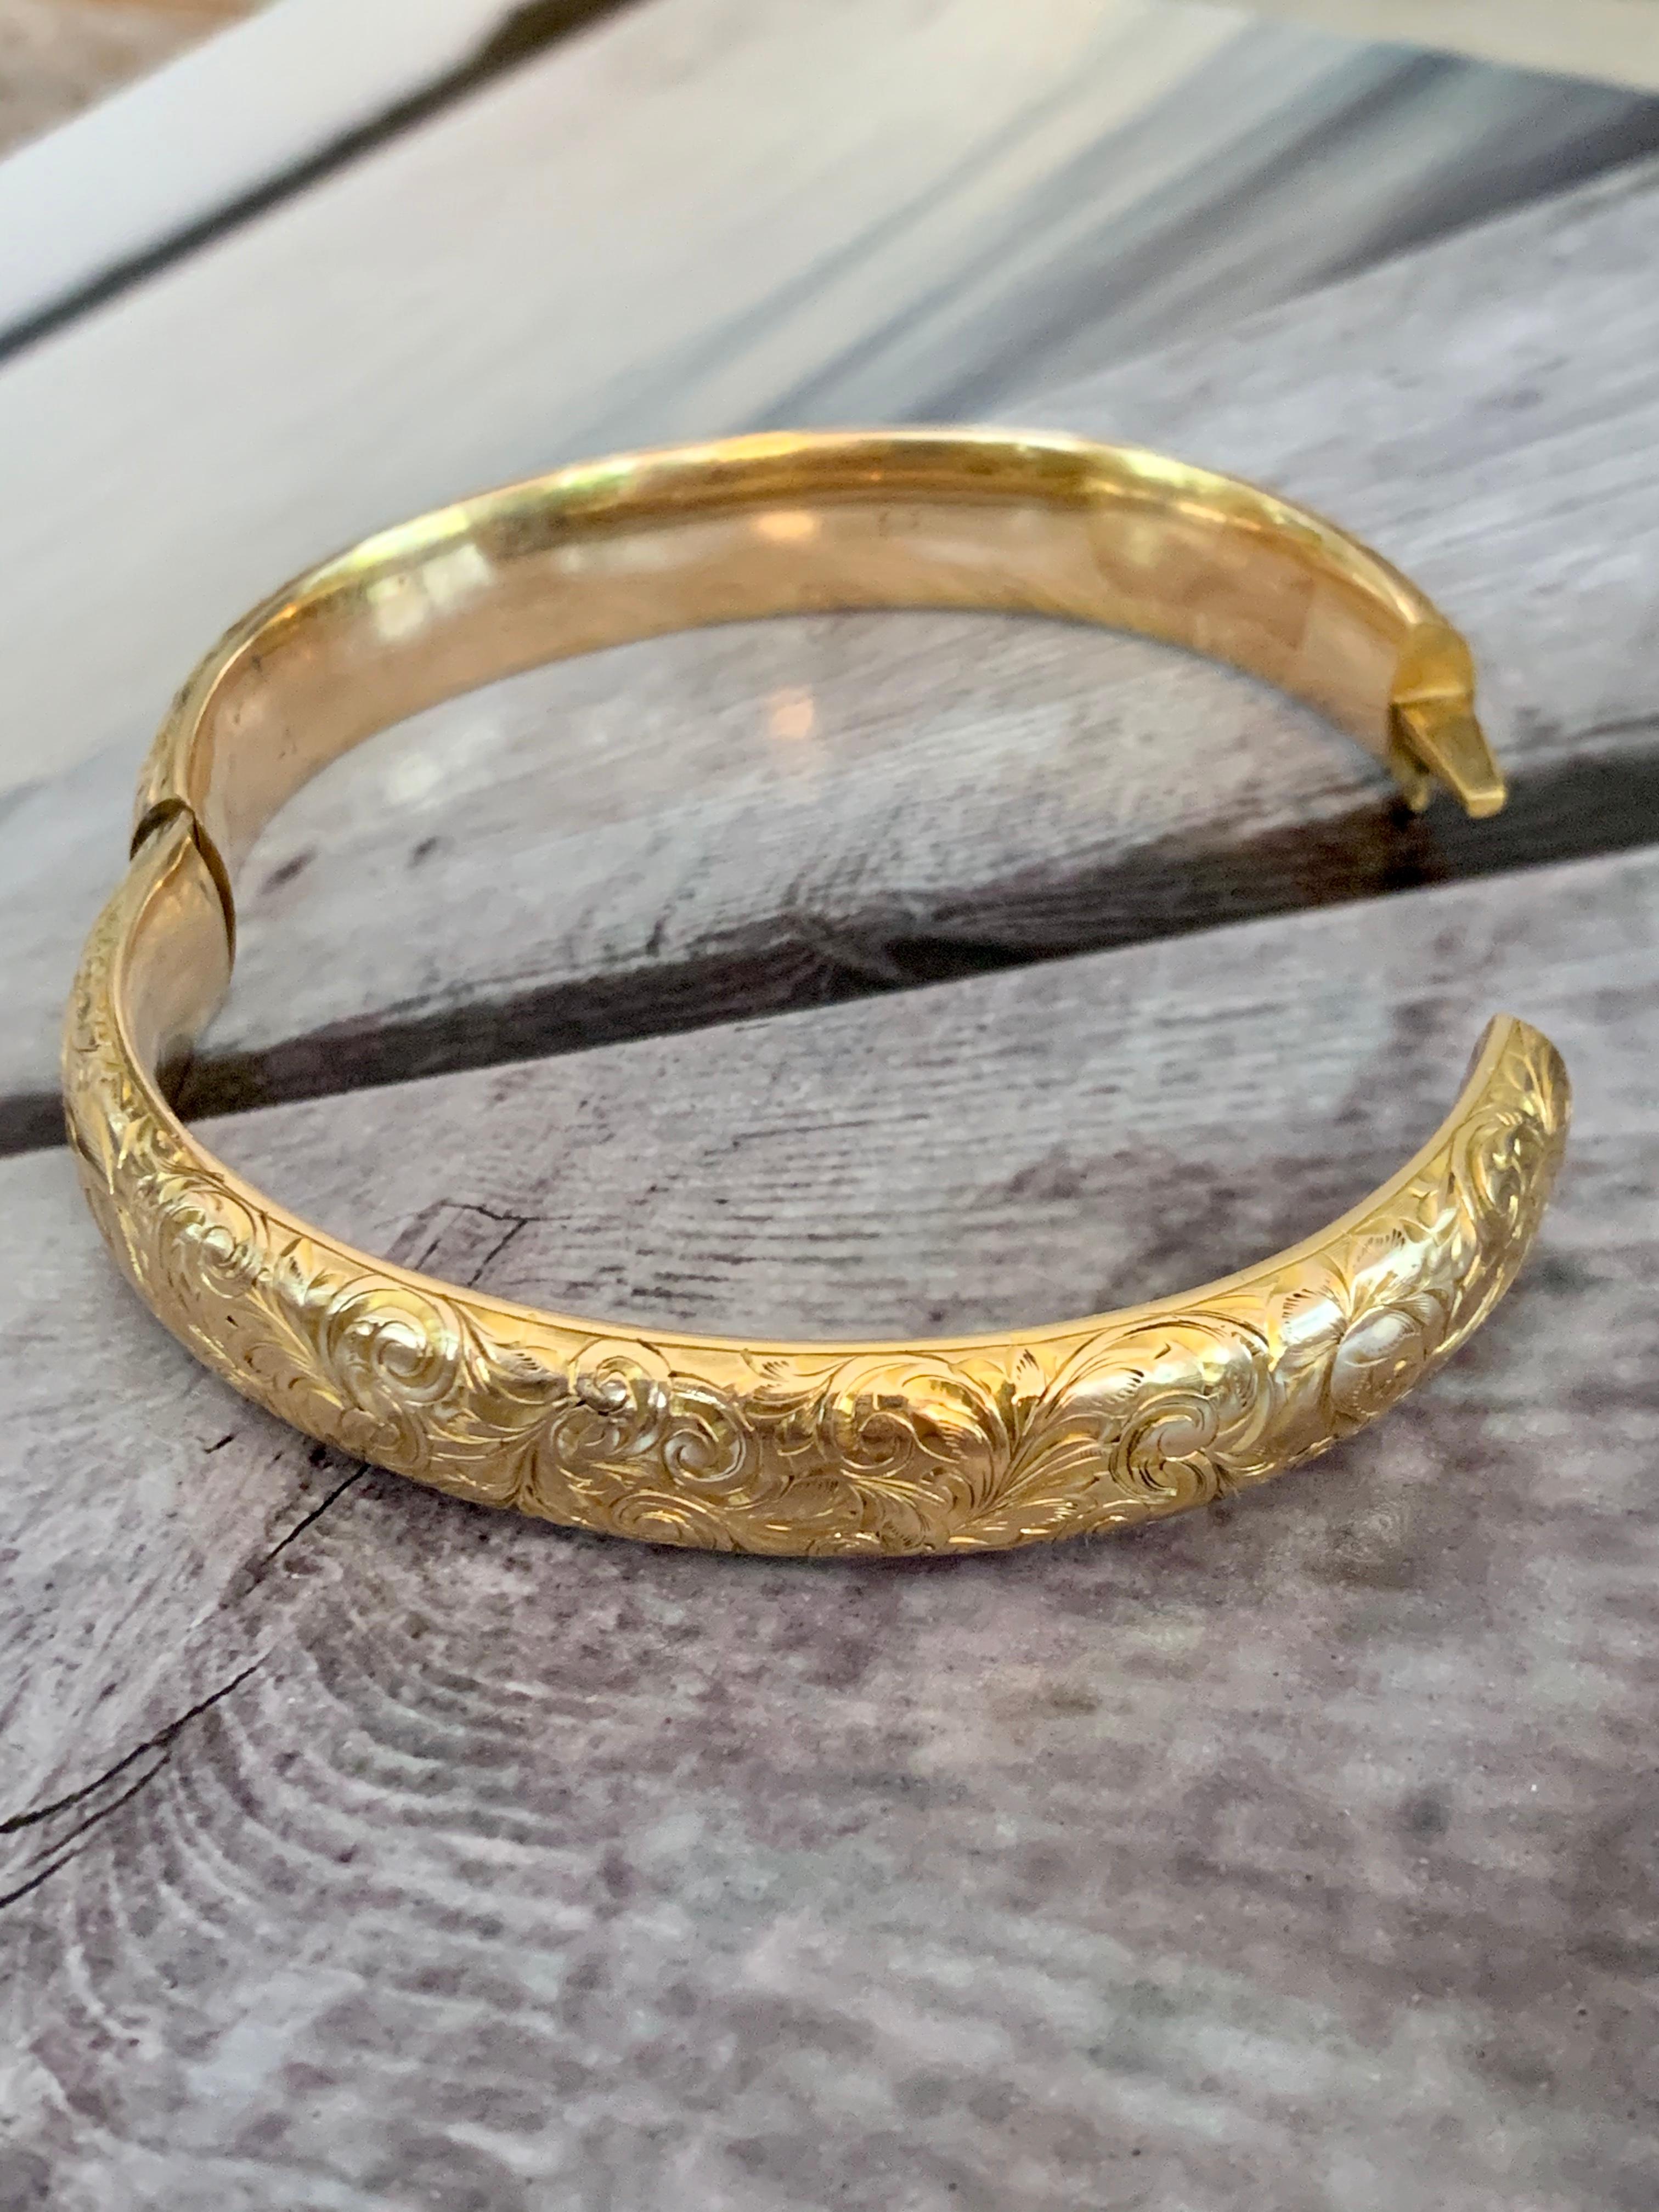 This Art Nouveau Riker Brothers features beautiful engraving on the outside of the bangle.  It is 14 karat yellow Gold and is hinged for easy on and off.

Measurements:
Inside: 7 1/4'
Outside: 8 1/2